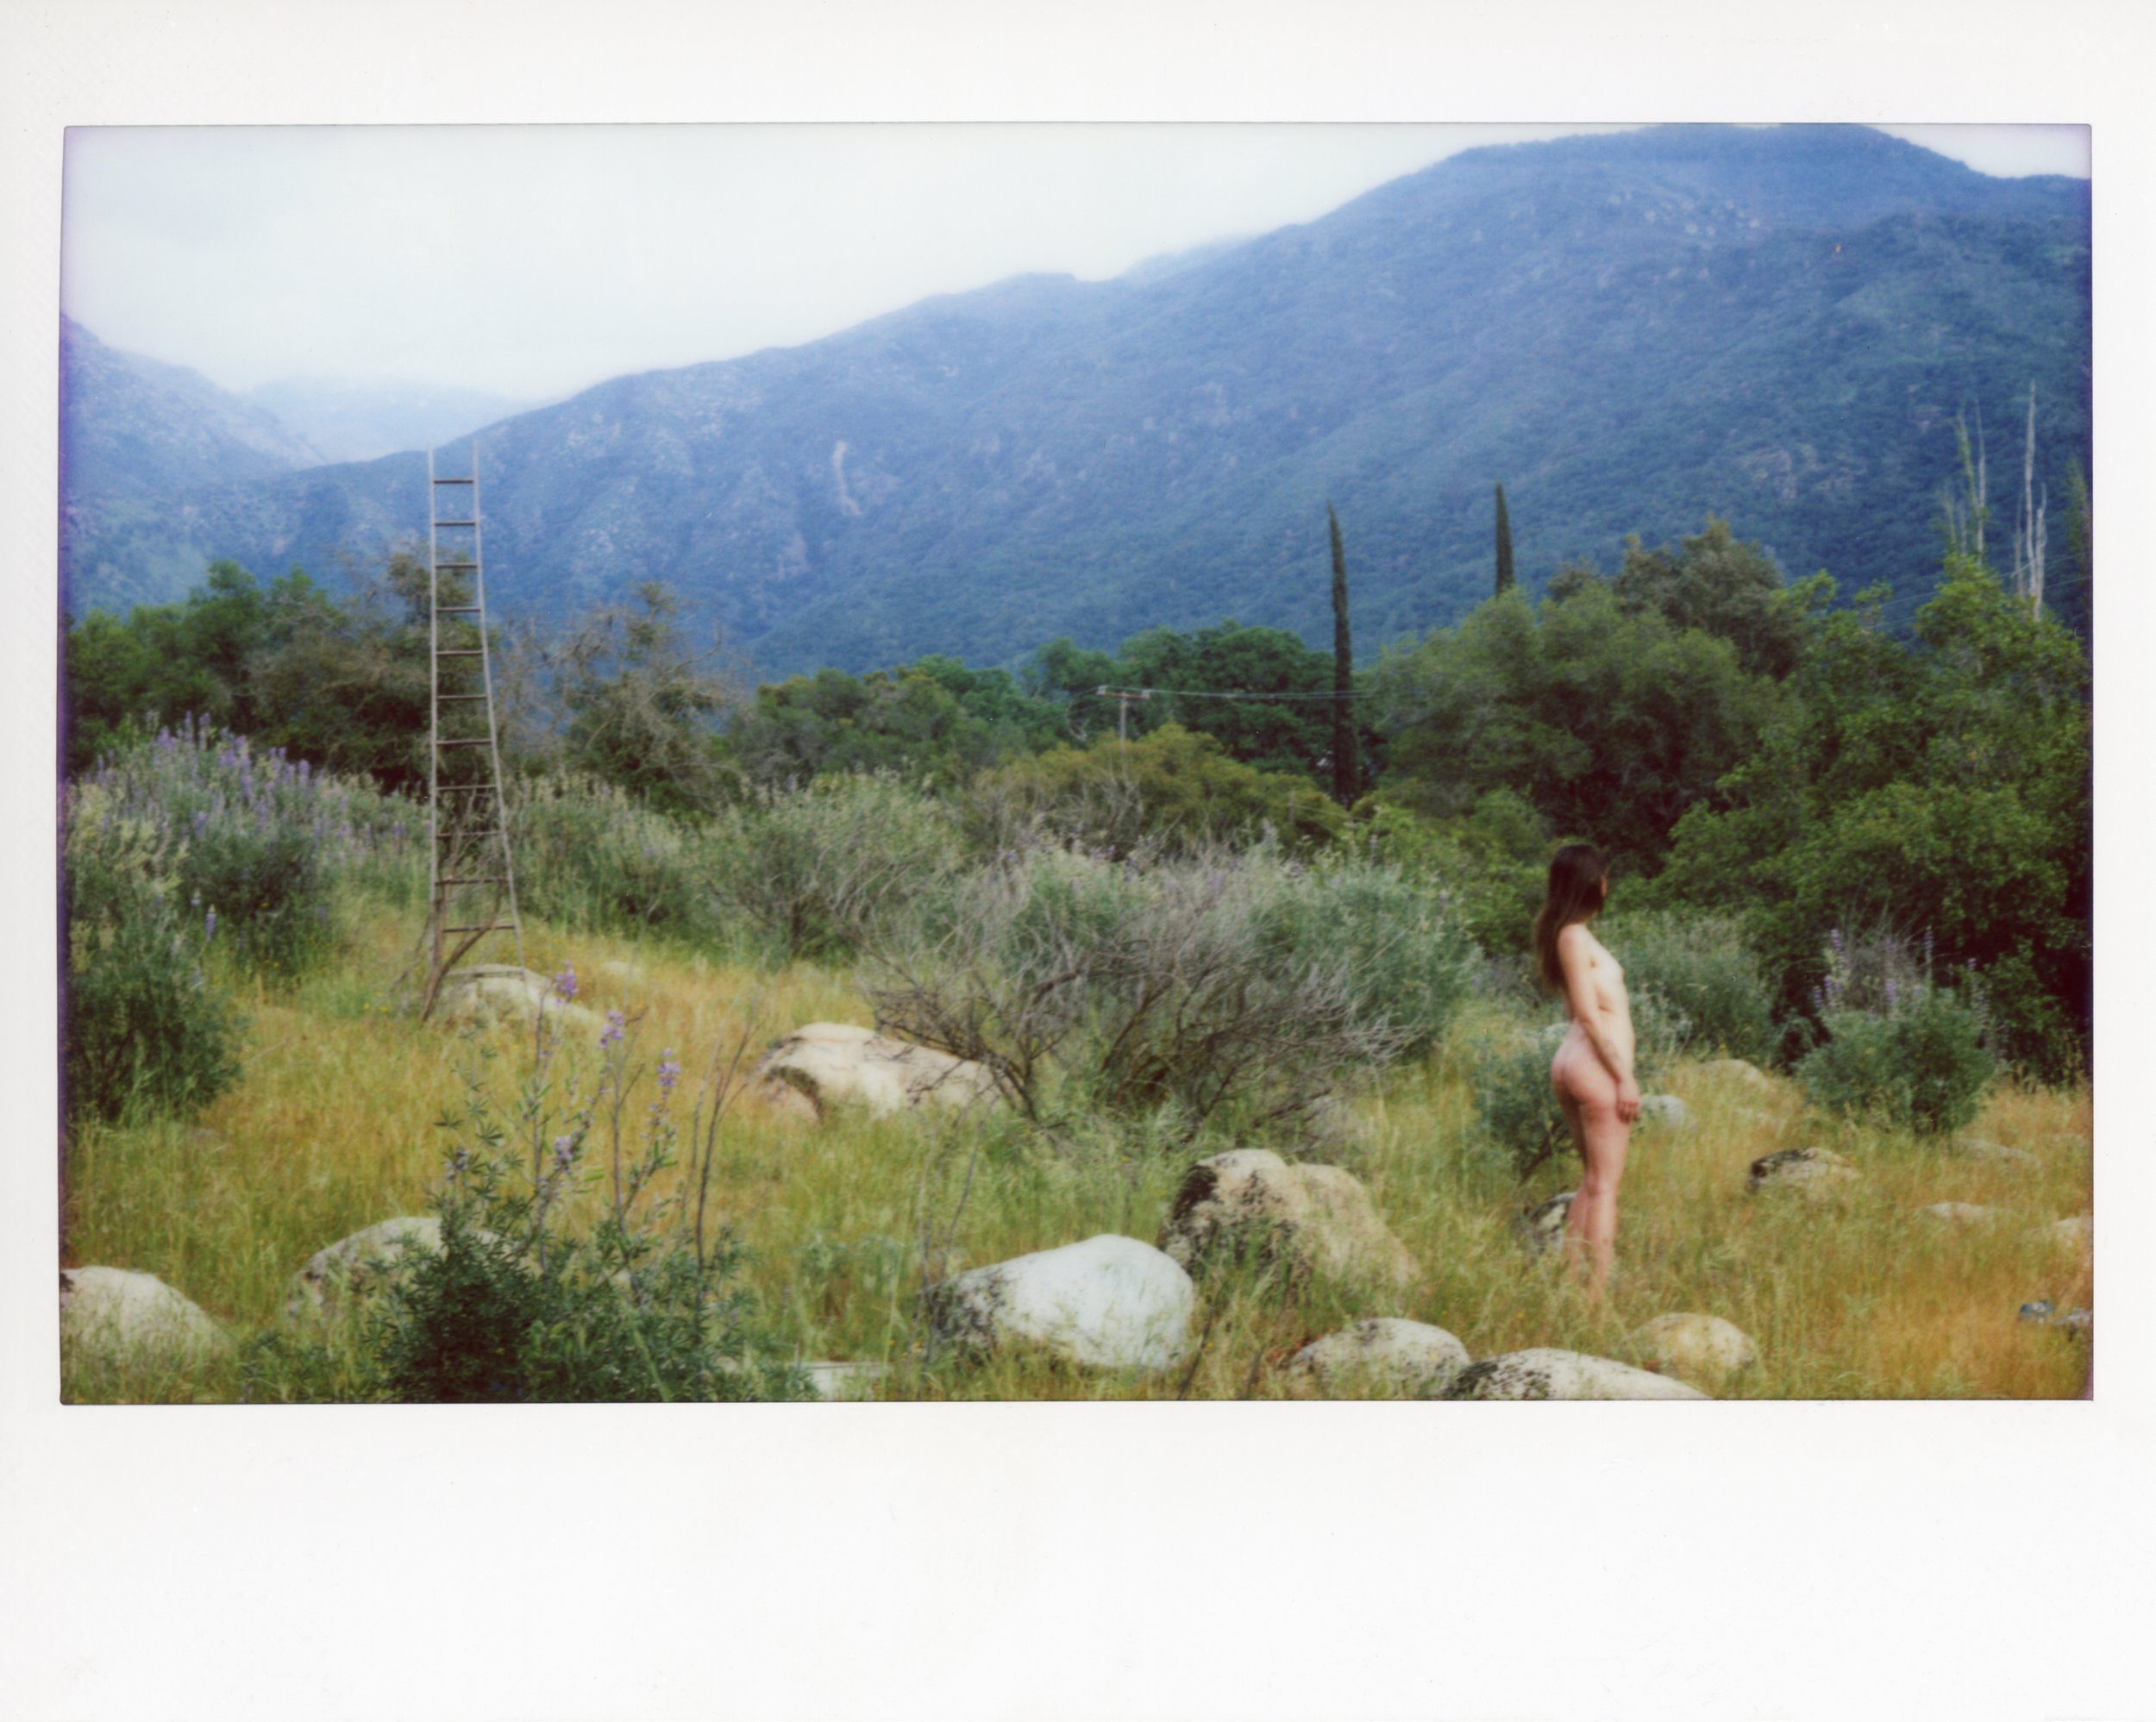 042323_instaxwide_025.jpg